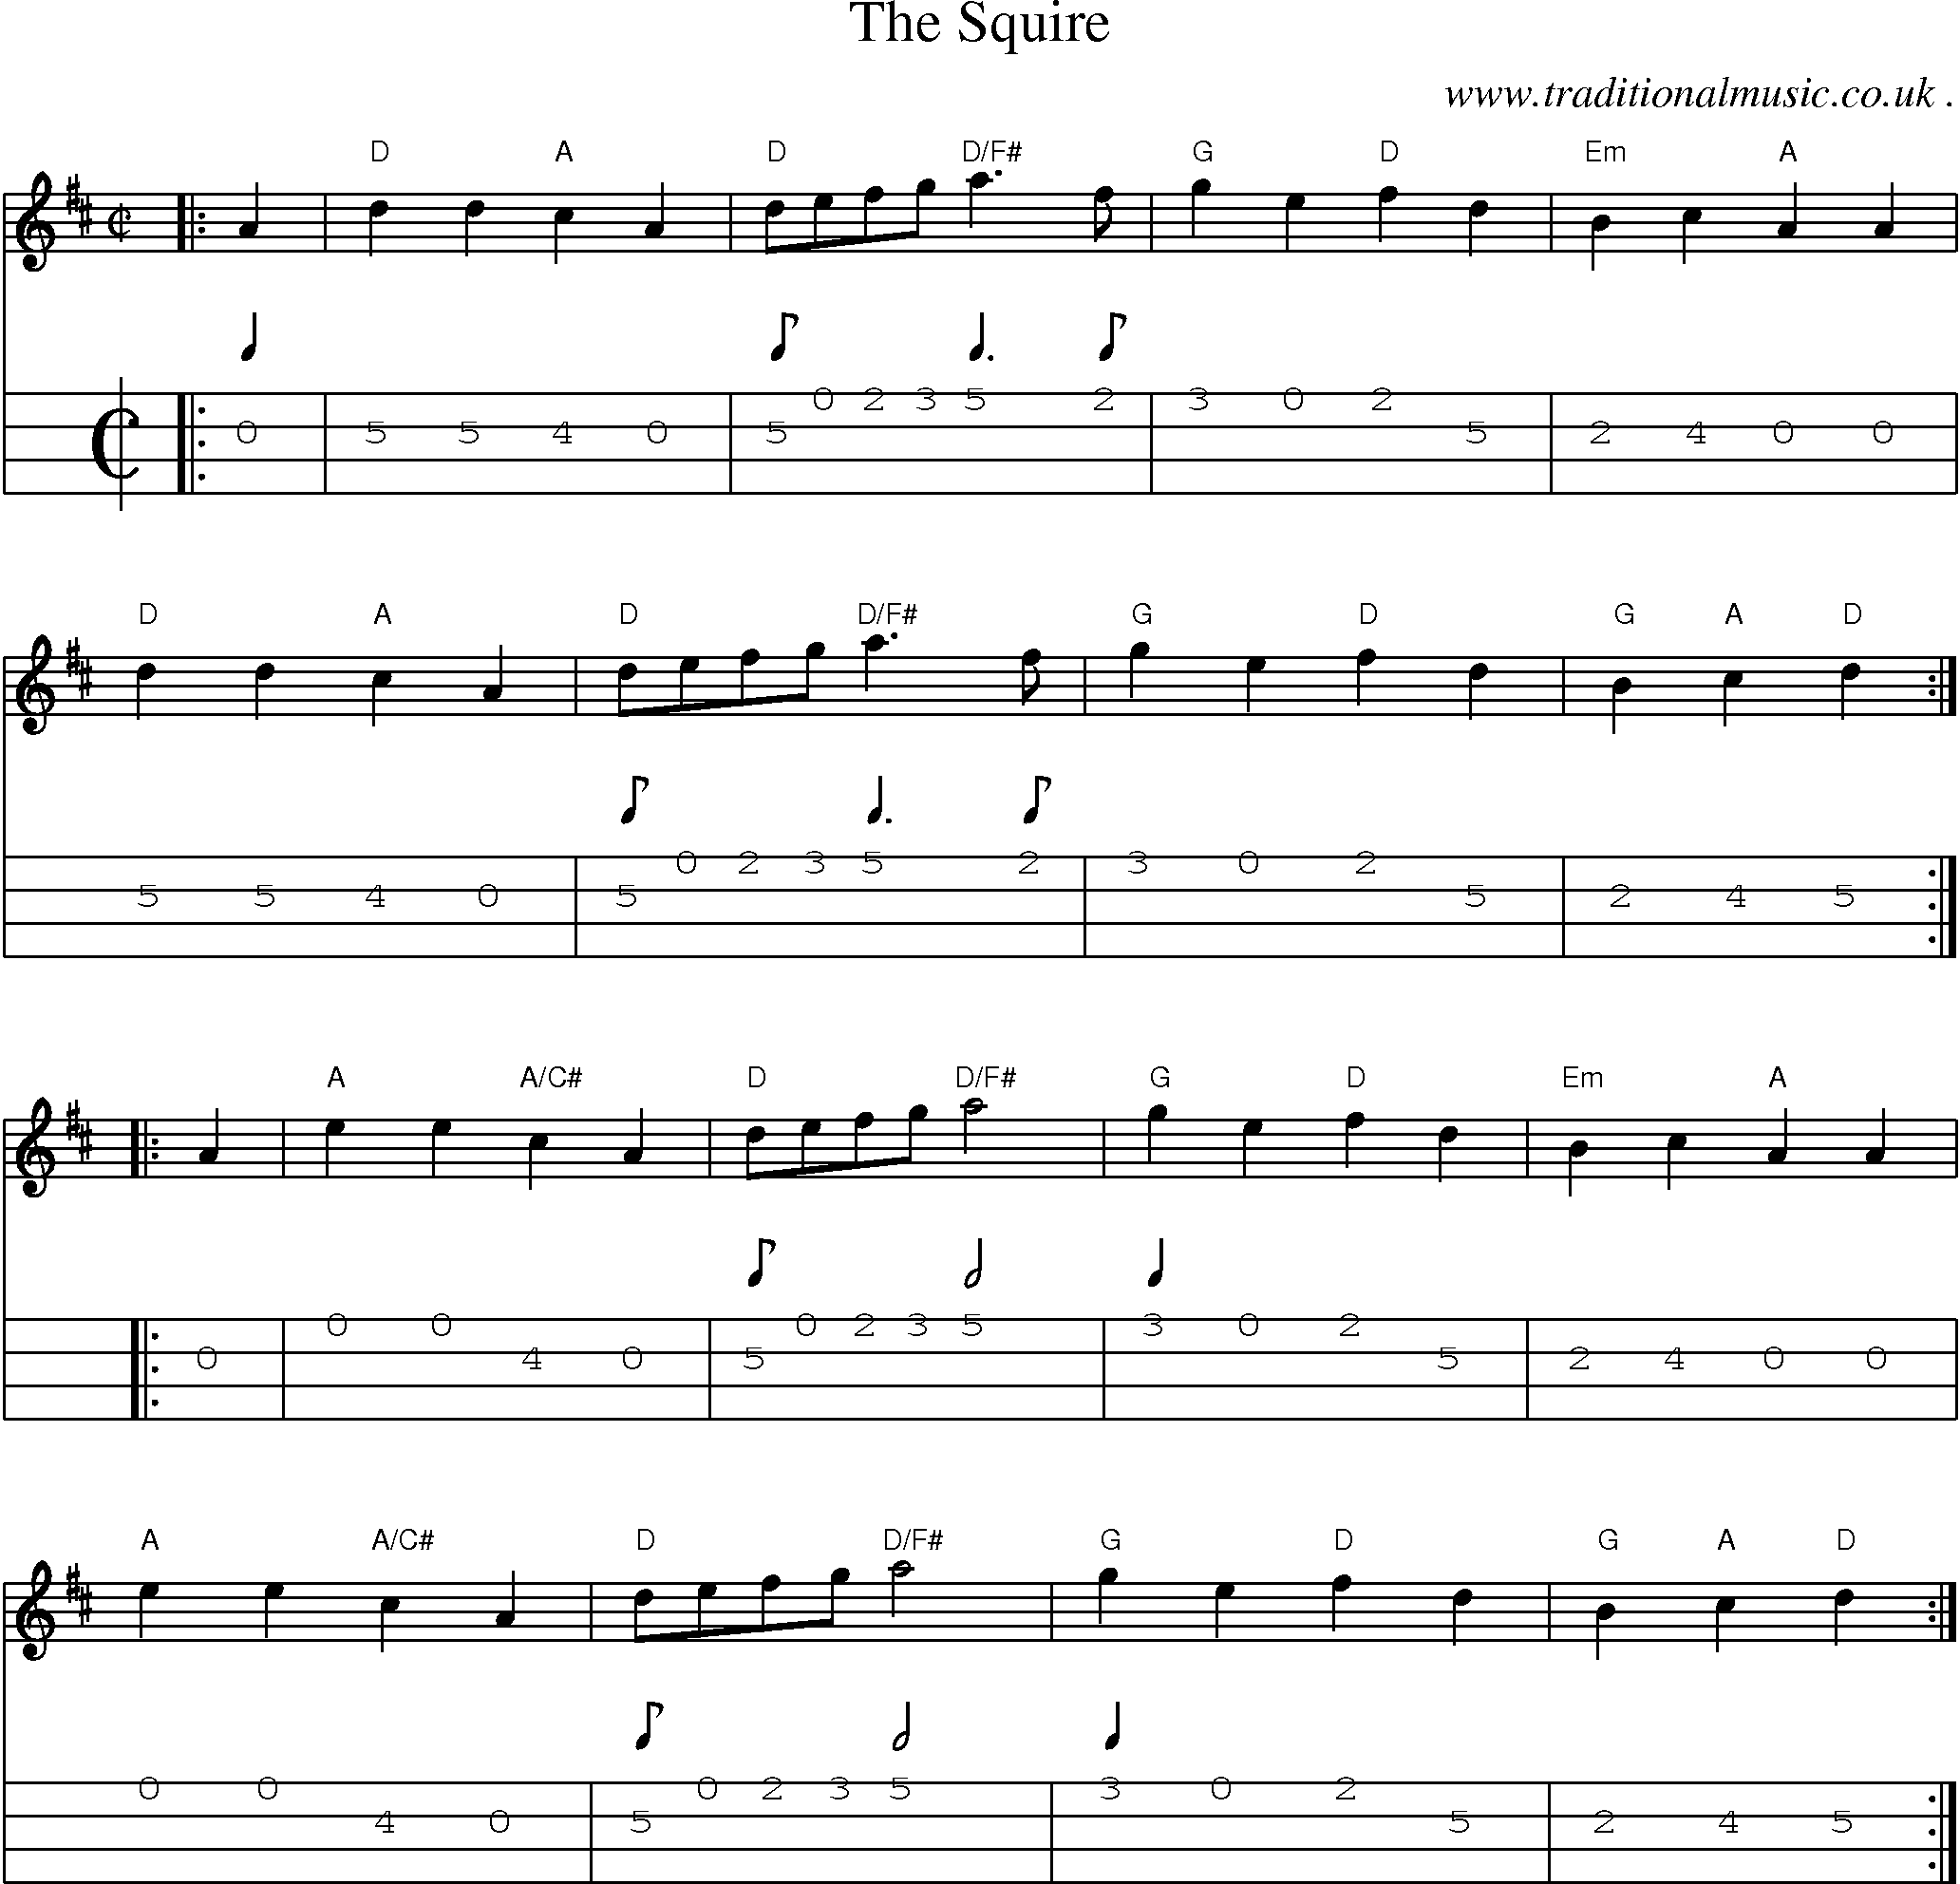 Music Score and Guitar Tabs for The Squire